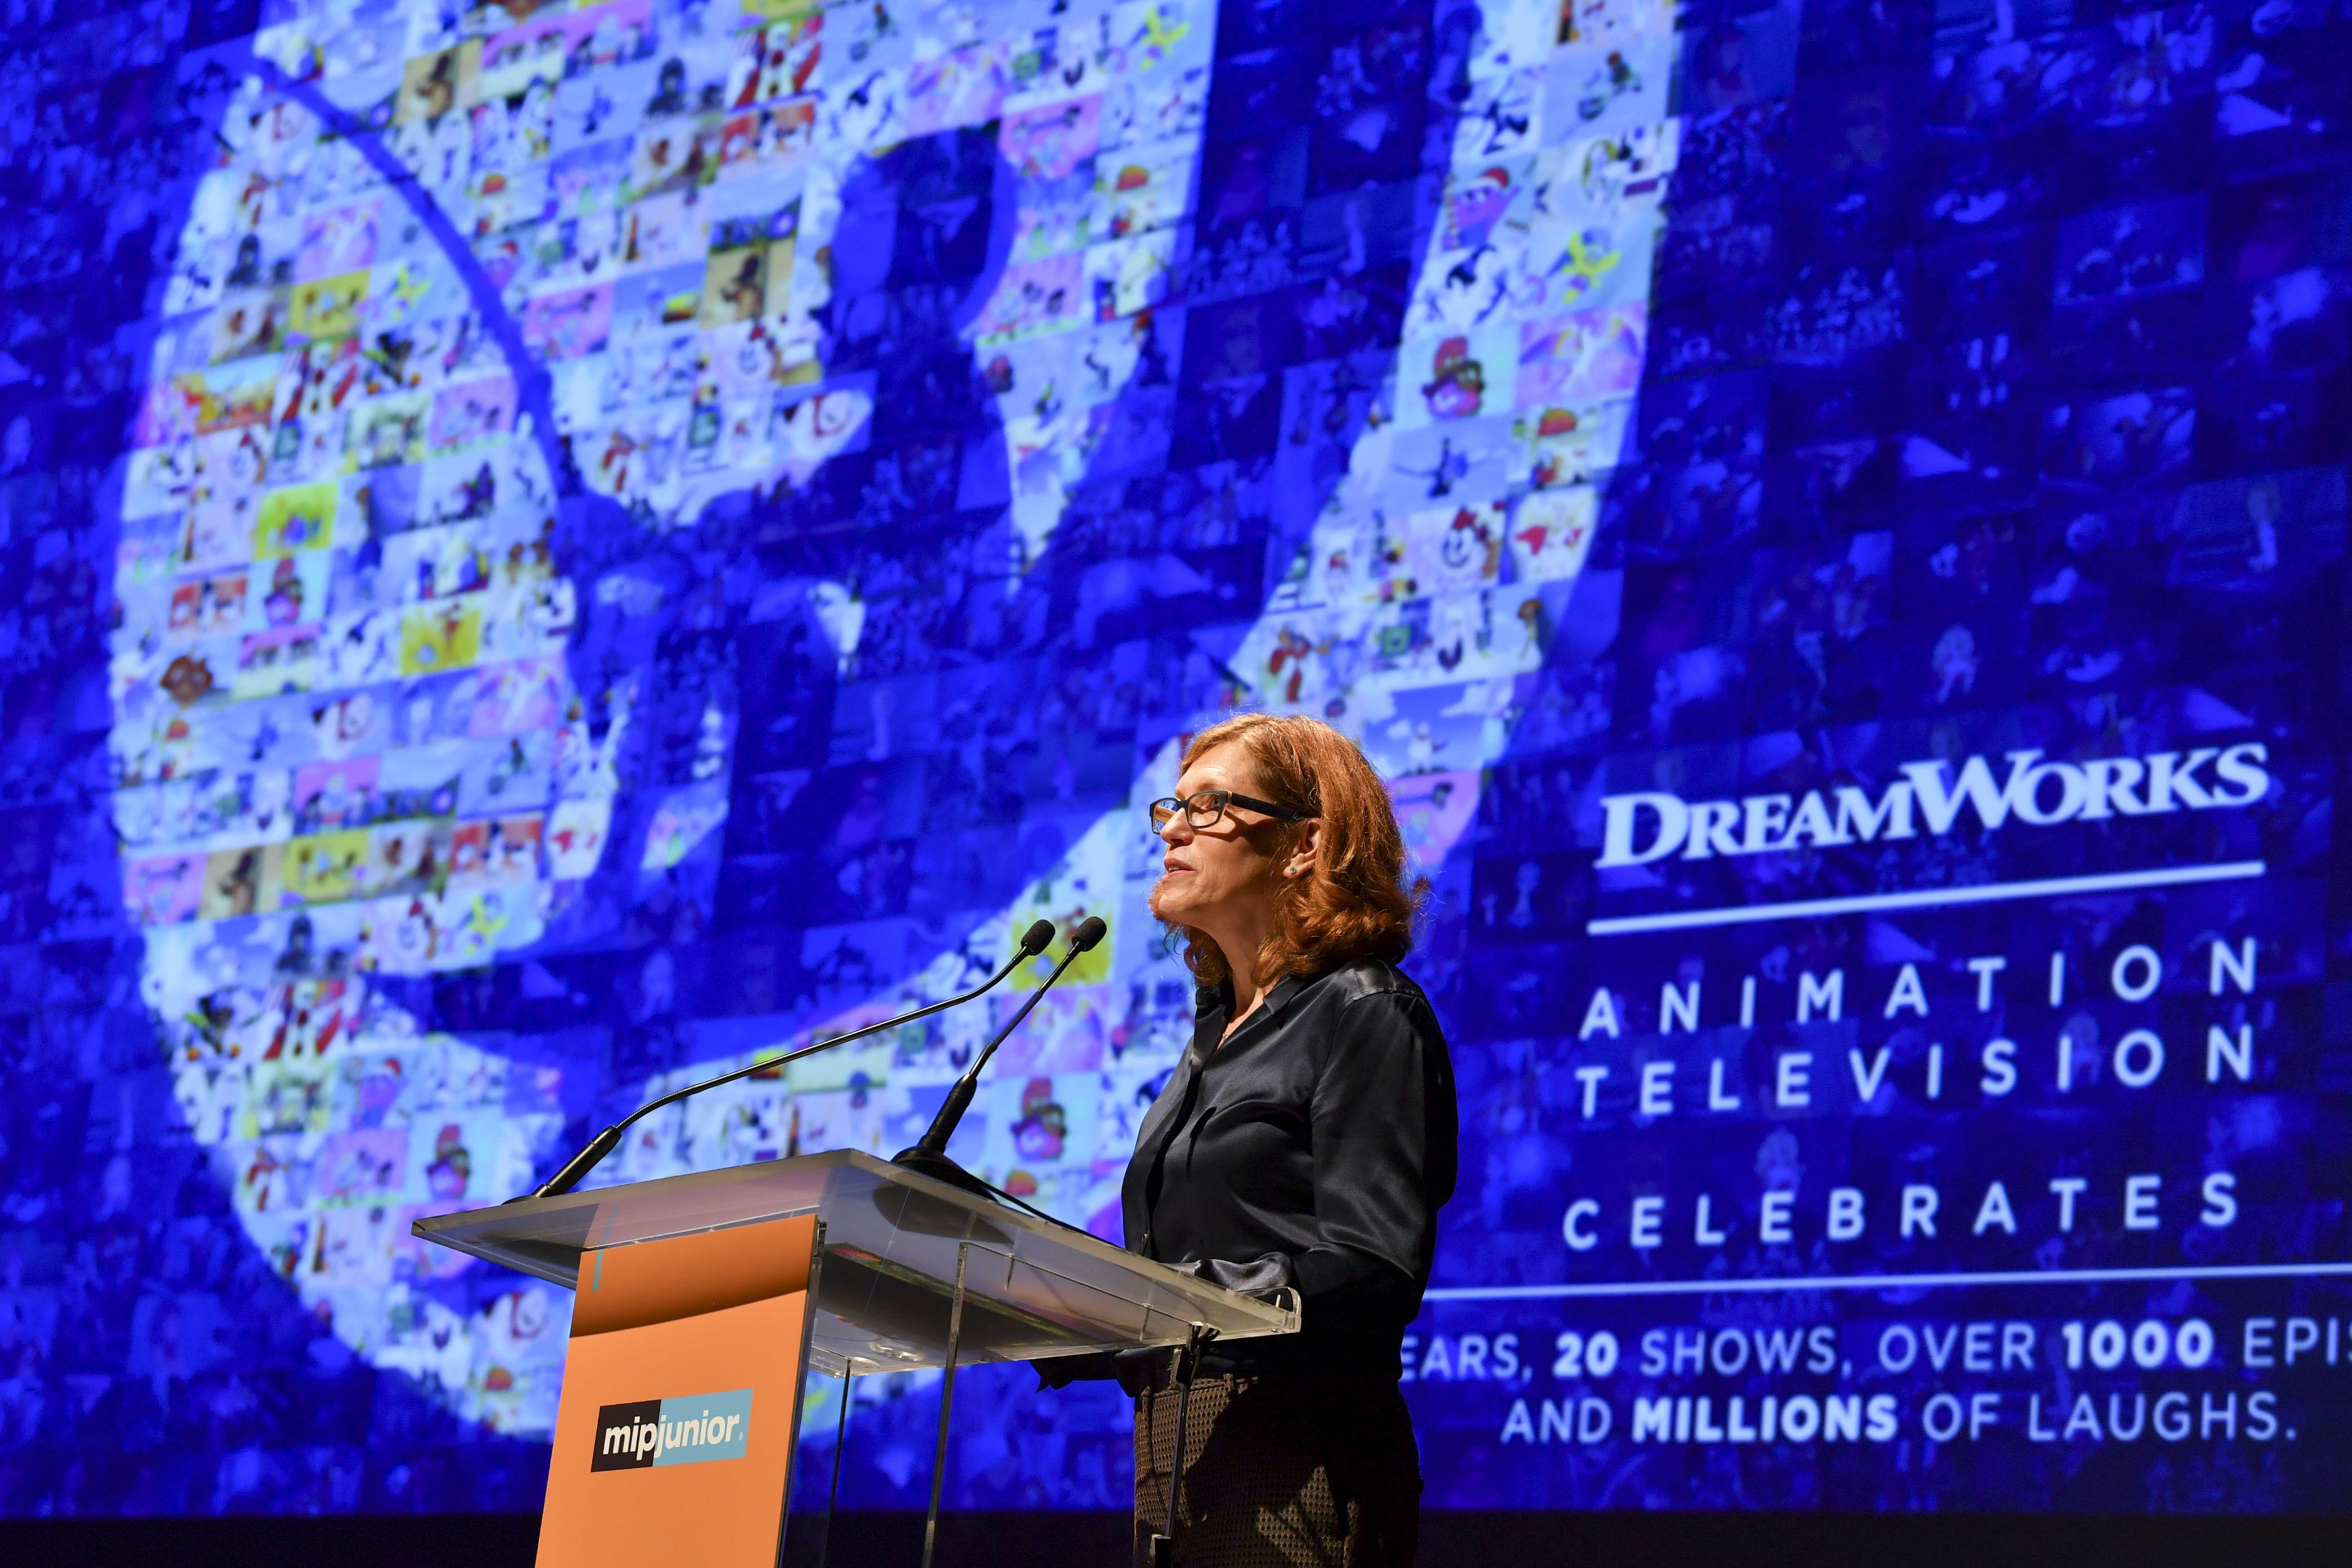 DreamWorks Animation Television Logo - Margie Cohn Talks Female Superheroes, Streaming Pros and Cons